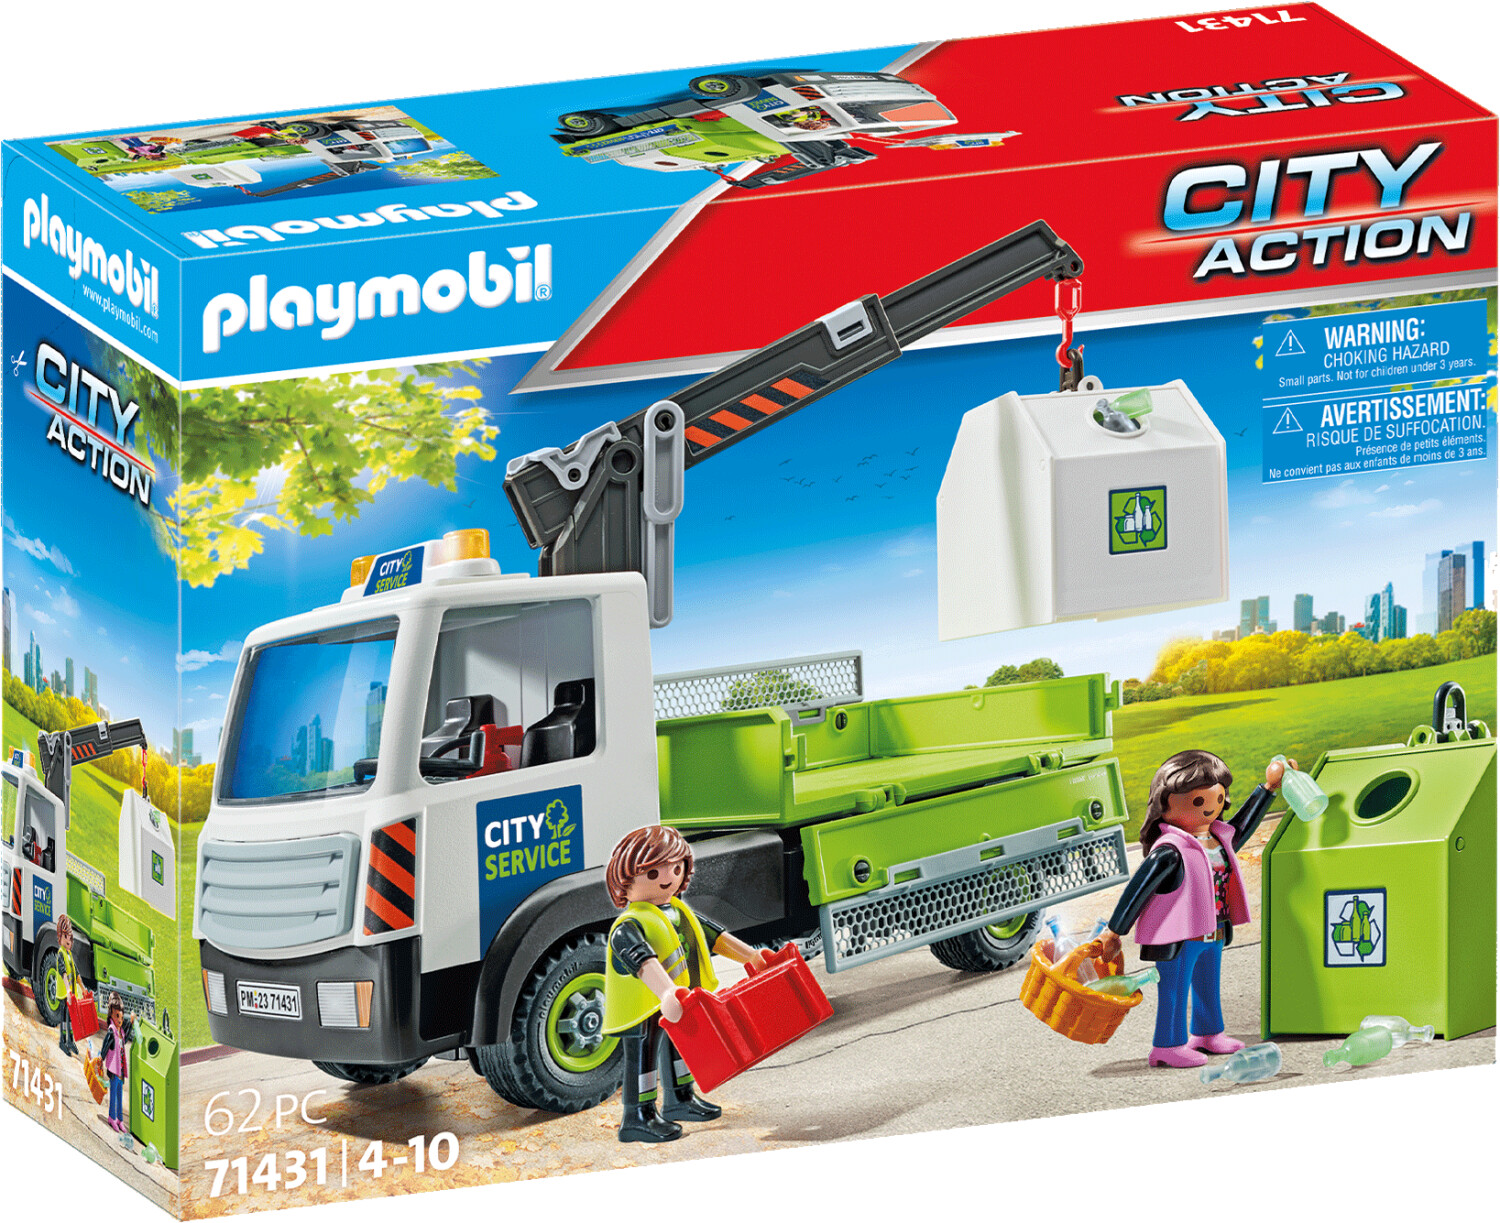 Buy Playmobil 71431 from £20.30 (Today) – Best Deals on